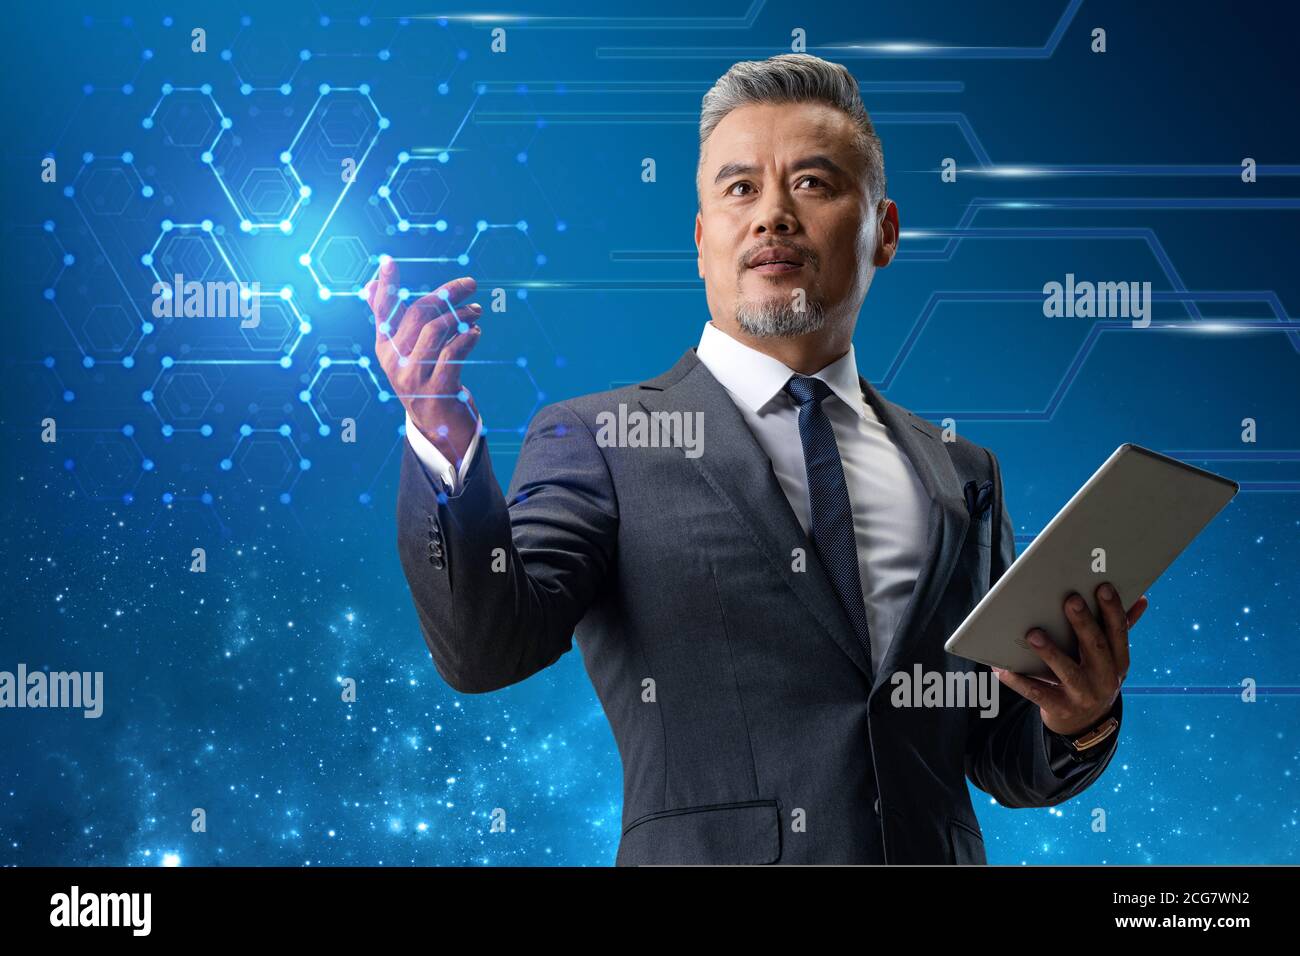 Holding a tablet business man Stock Photo